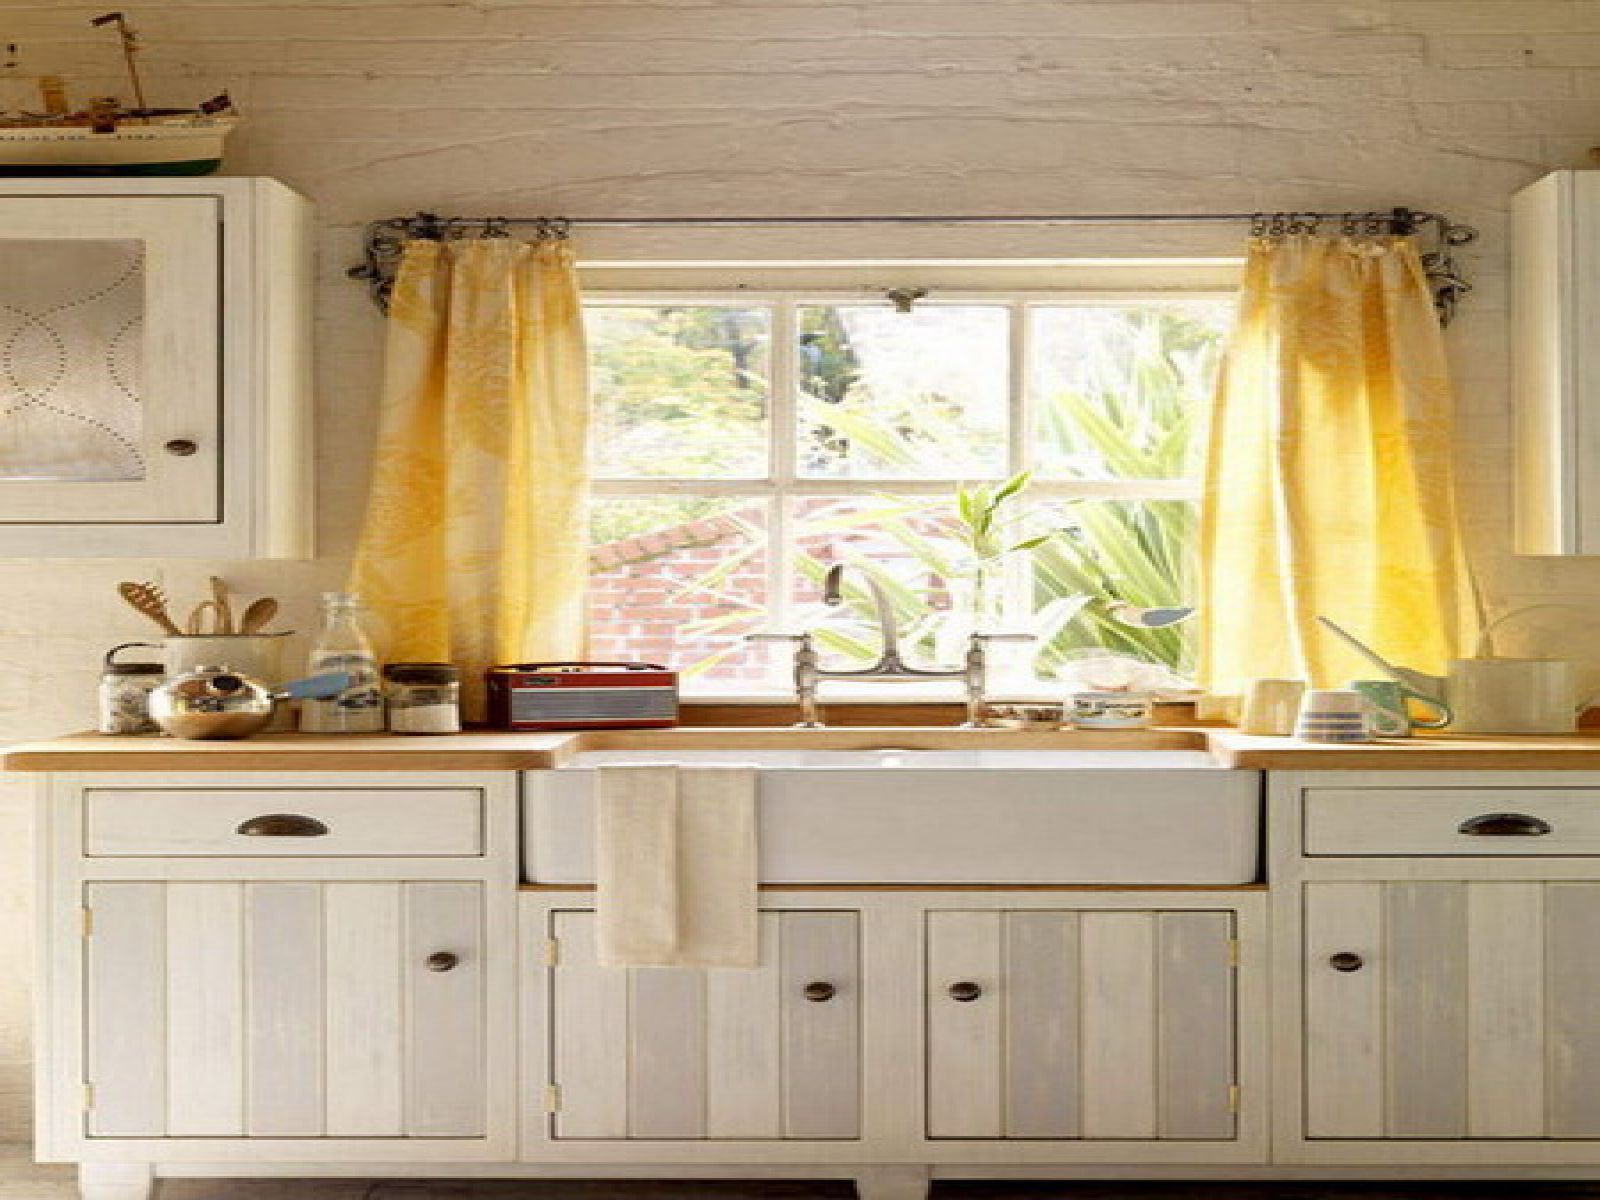 Kitchen Door Window Curtains
 Guide to Choose the Appropriate Kitchen Curtain Ideas